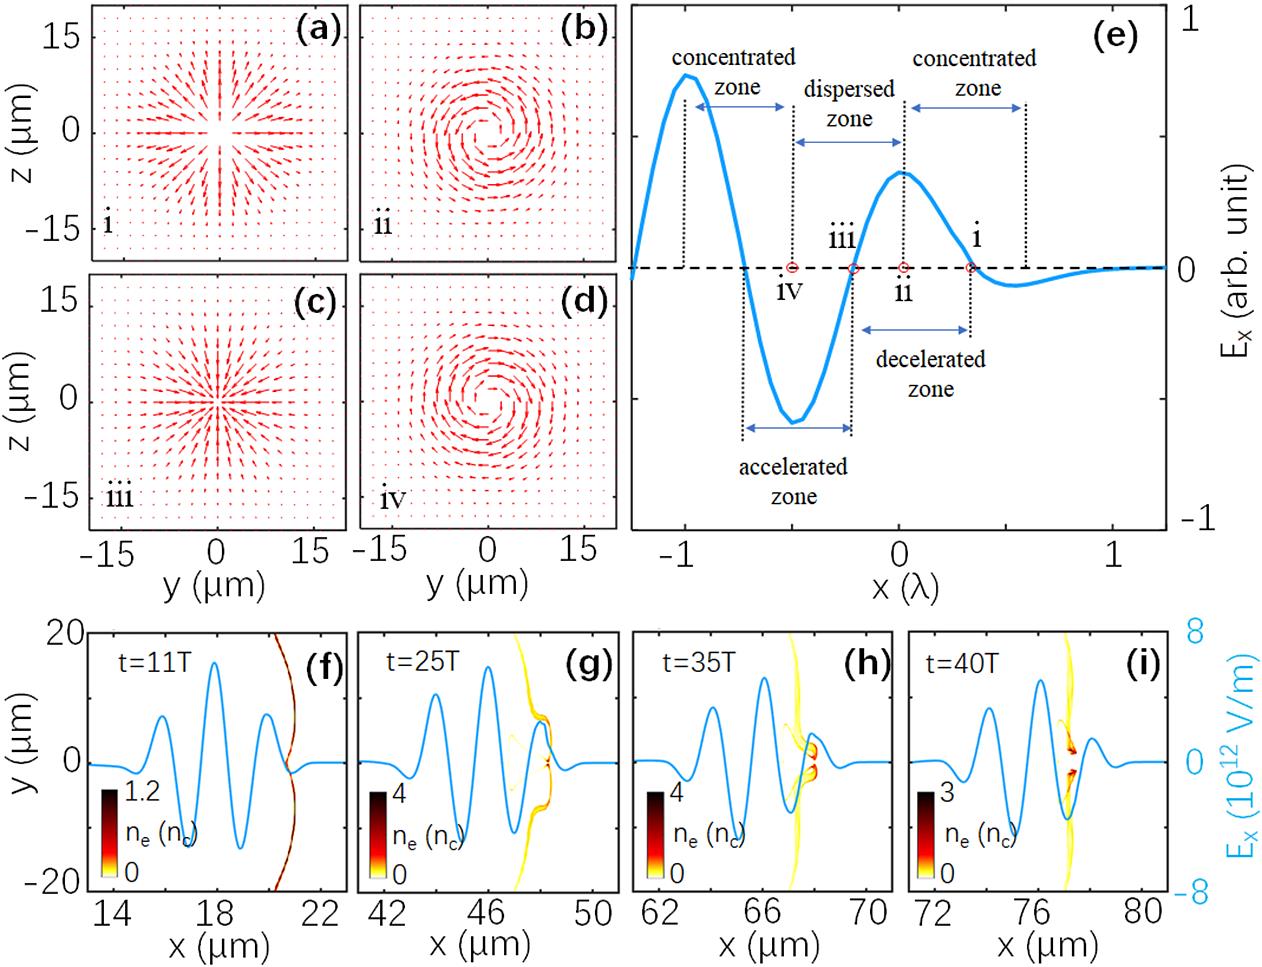 Structure of electric fields of CP LG laser and phase-space distribution of electrons. Normalized vector plots of the transverse electric fields in one laser cycle for (a) point i, (b) point ii, (c) point iii, and (d) point iv marked in (e). (e) Normalized amplitude of Ex (blue line) on the x-axis for Ψ = 0. Density distributions of electron slice and amplitude of Ex (blue solid) for Ψ = 0 at (f) t = 11T, (g) t = 25T, (h) t = 35T, and (i) t = 40T are plotted.